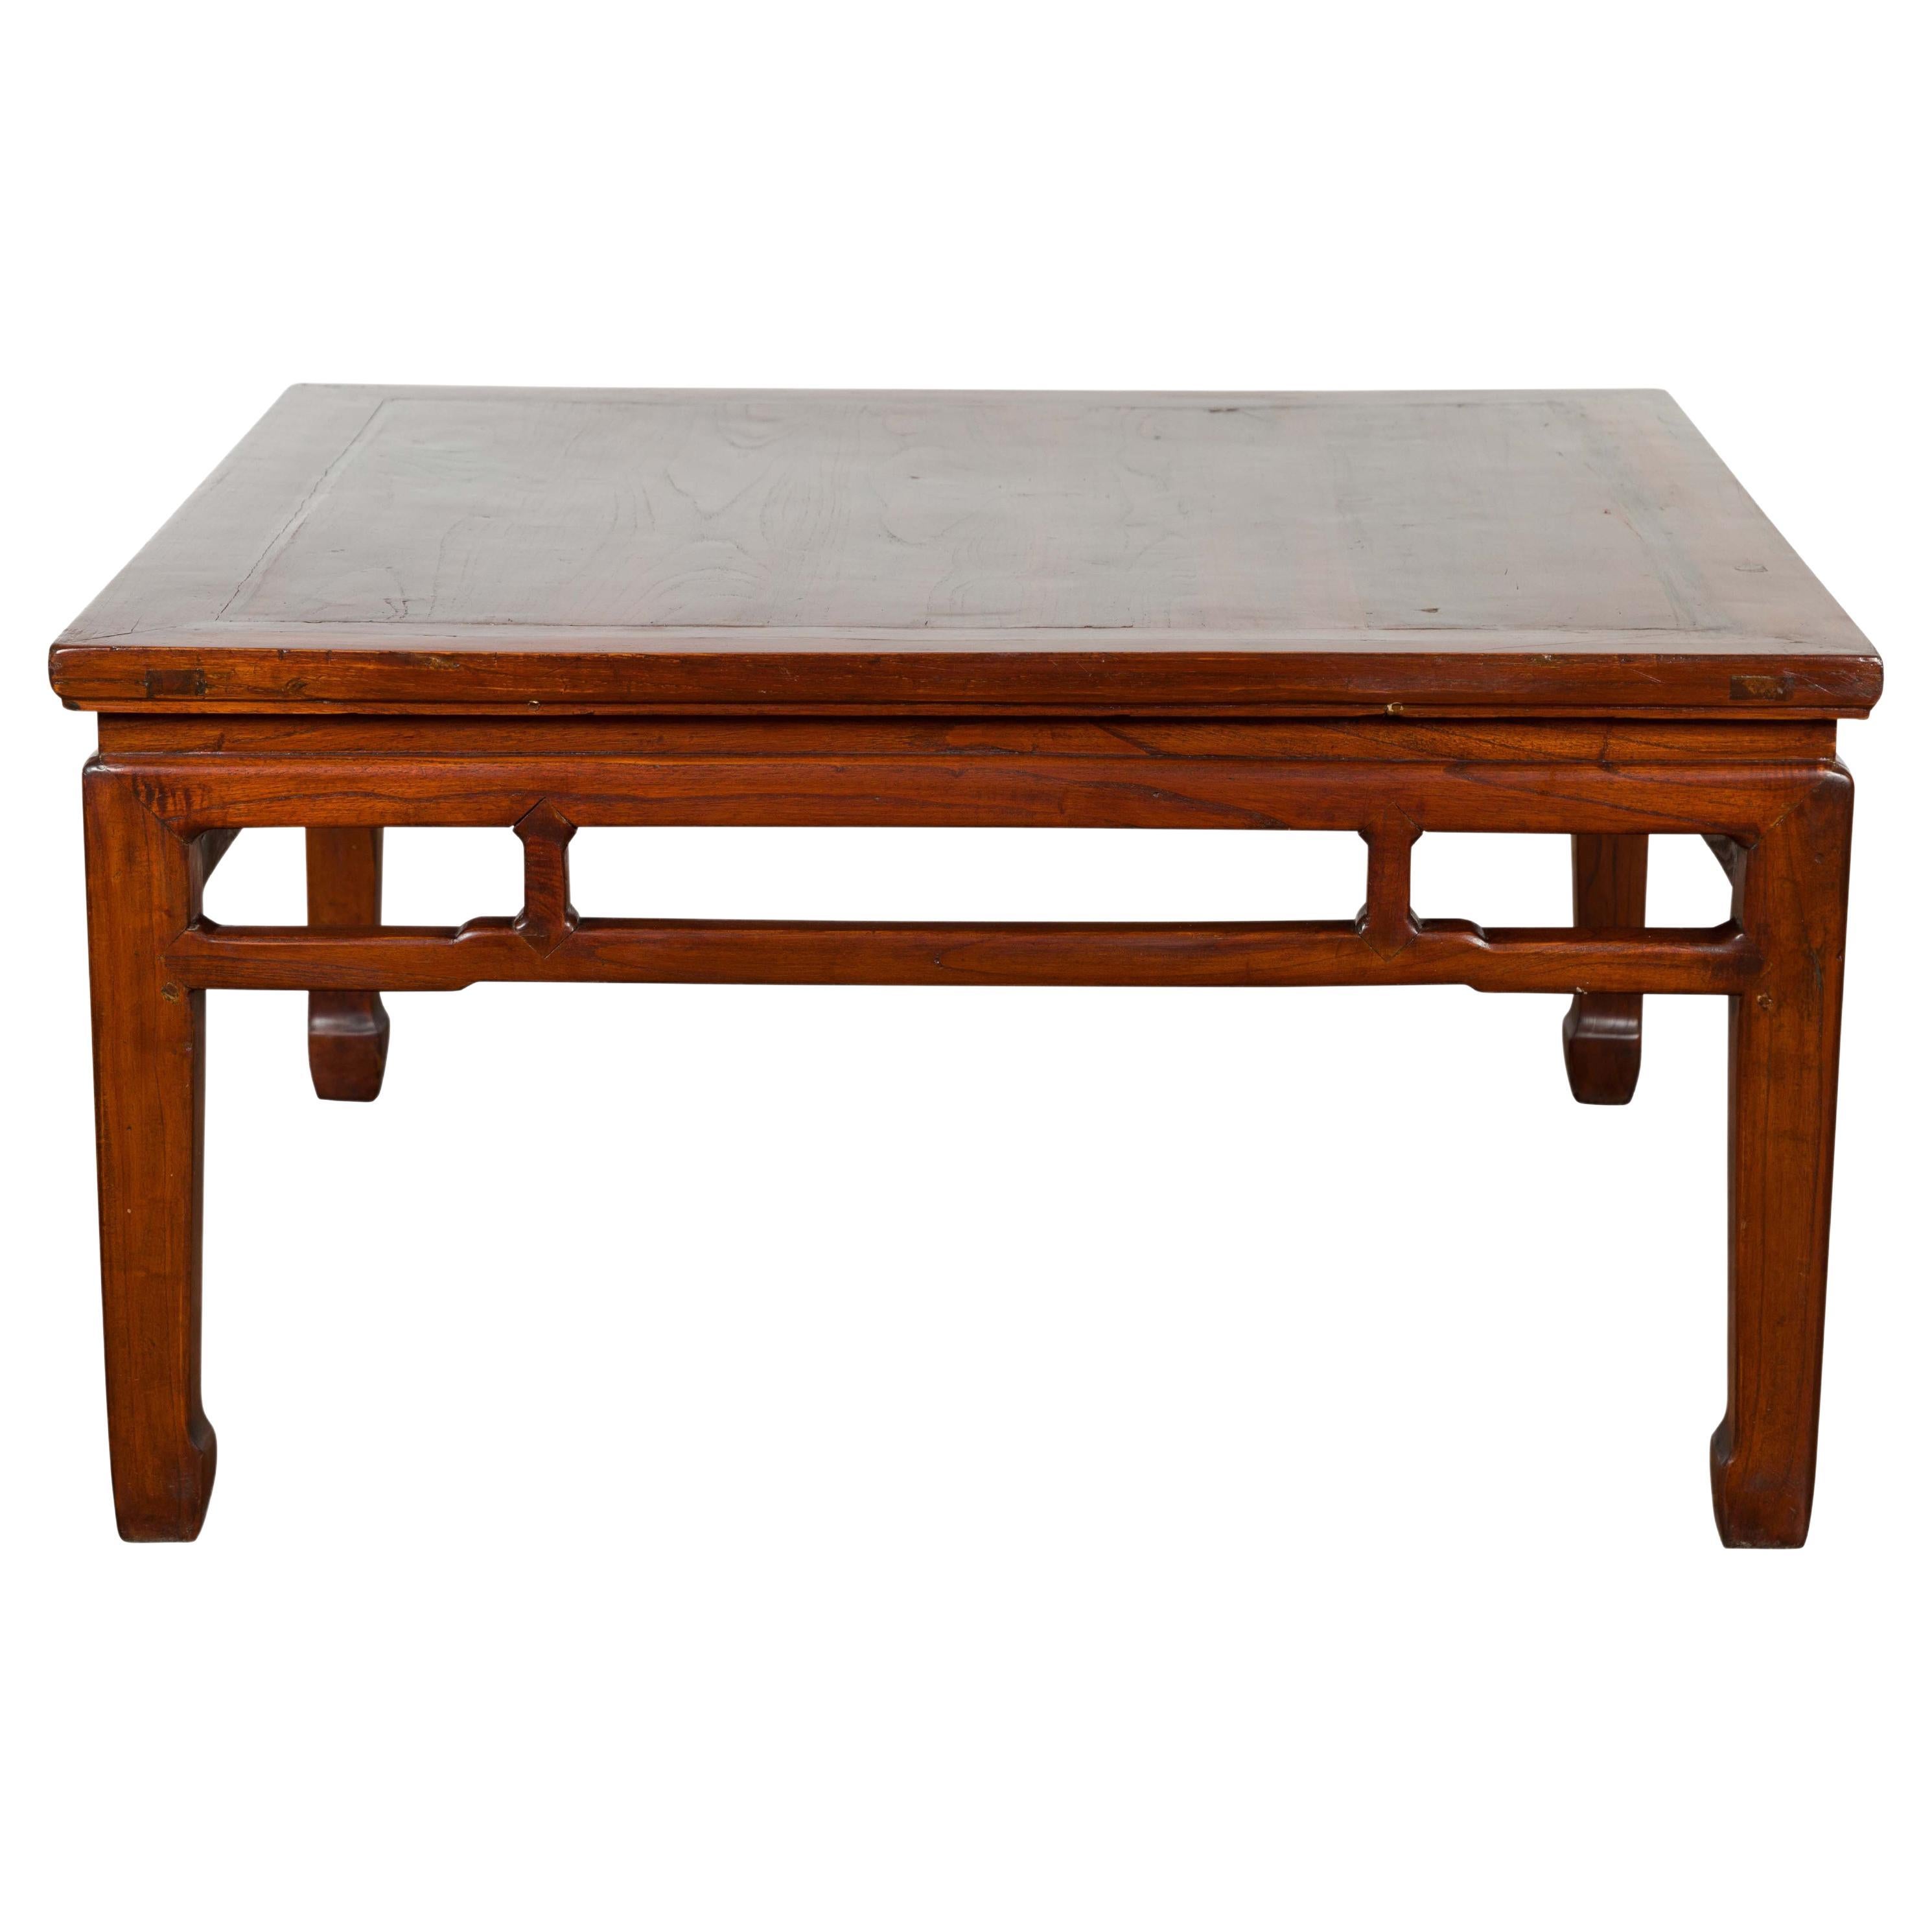 Rich Brown Square Shaped Coffee Table with Spacious Top For Sale